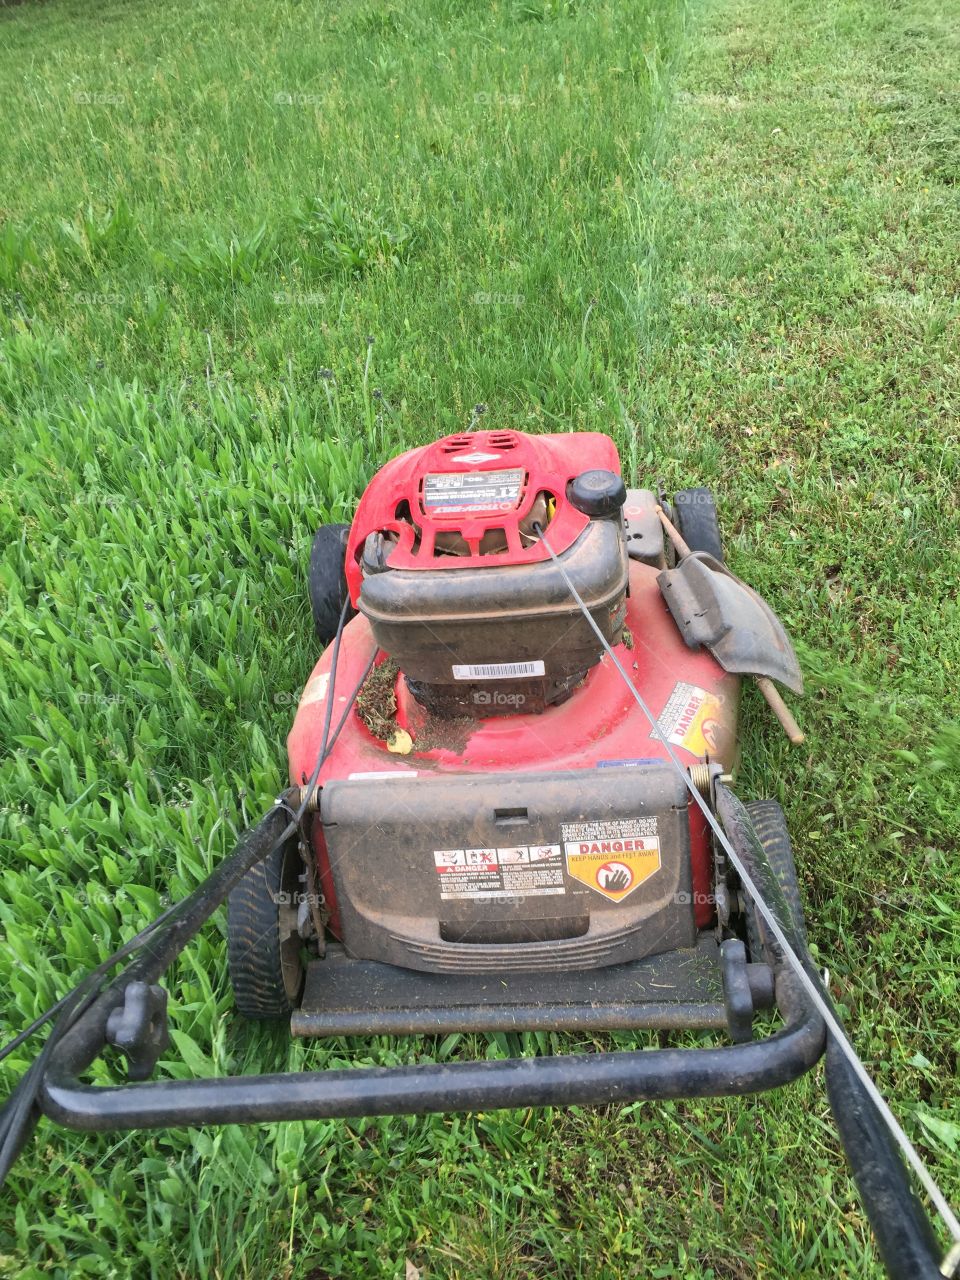 Time to cut the grass